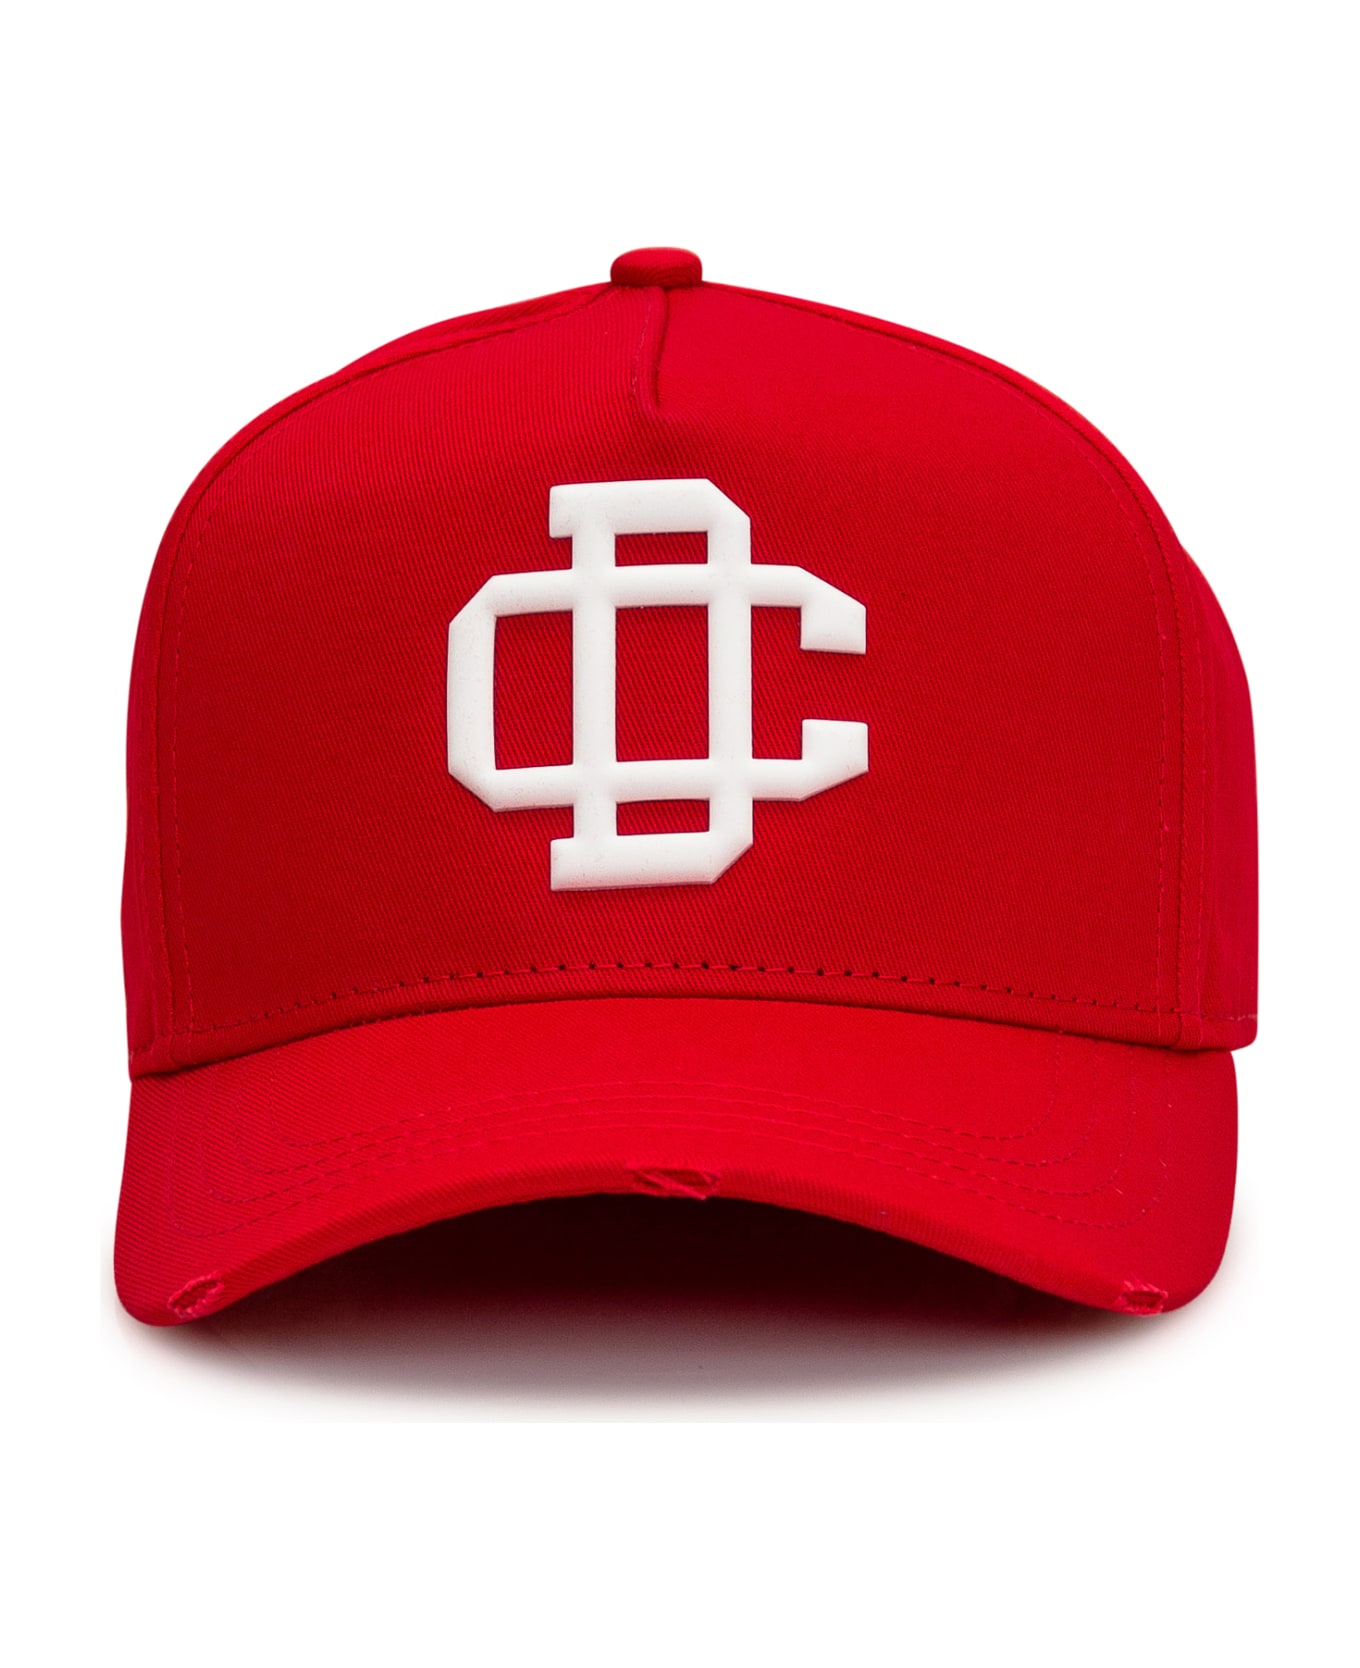 Dsquared2 Baseball Cap With Patch - ROSSO BIANCO 帽子